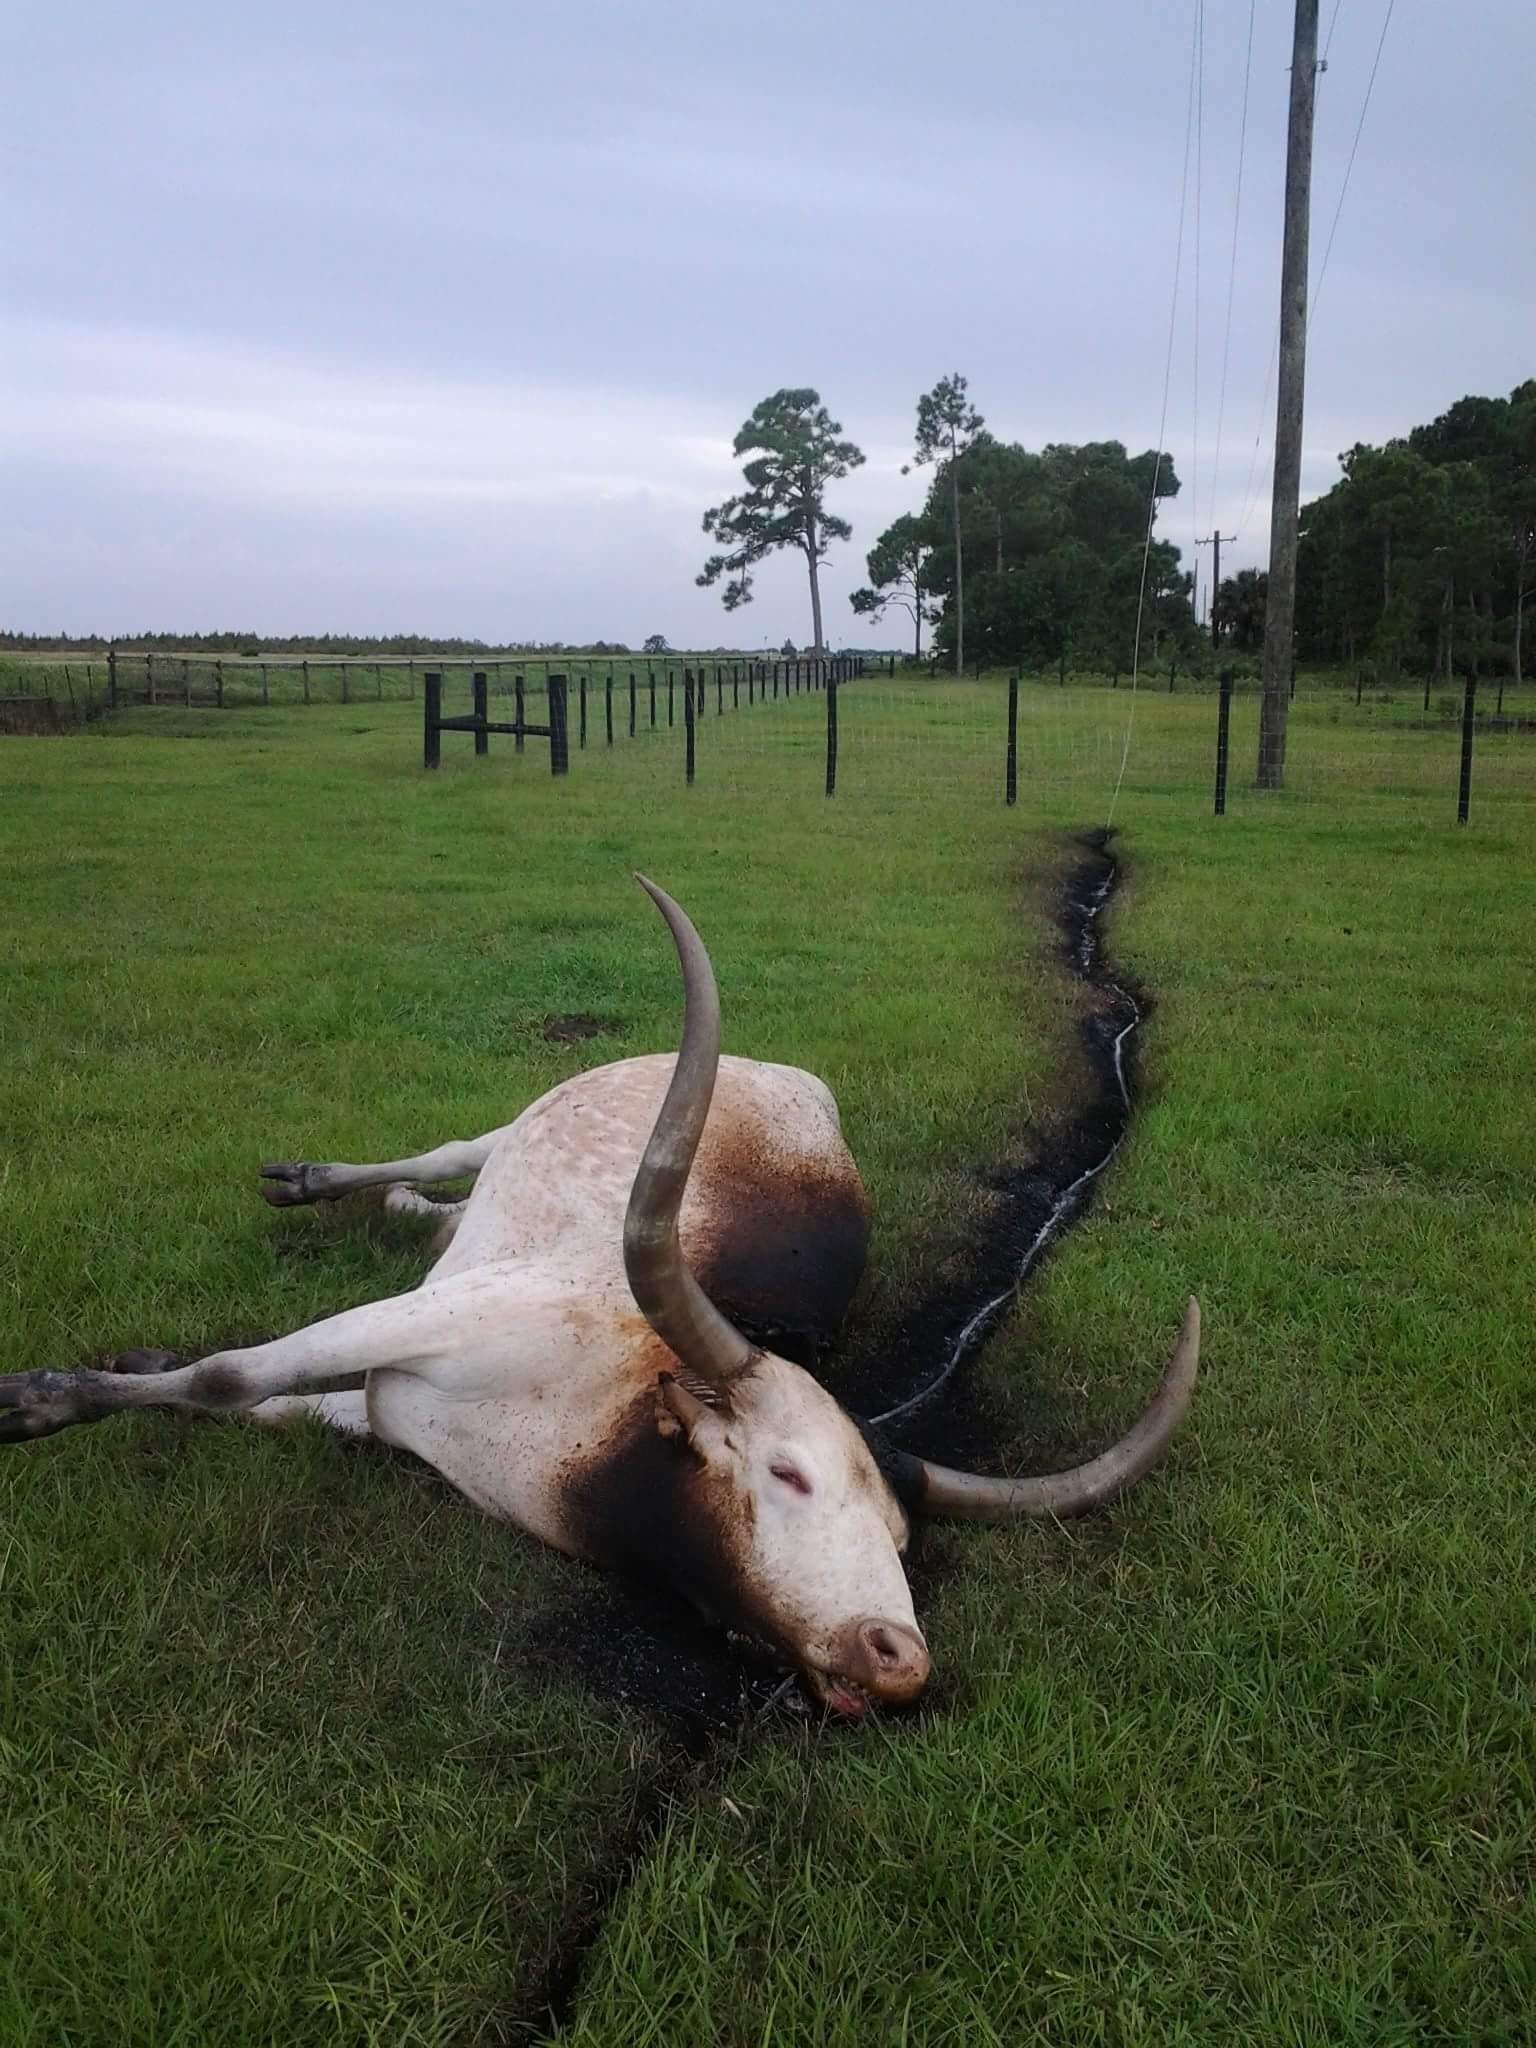 I saw this on the WTF subreddit, powerline fell and killed this ...